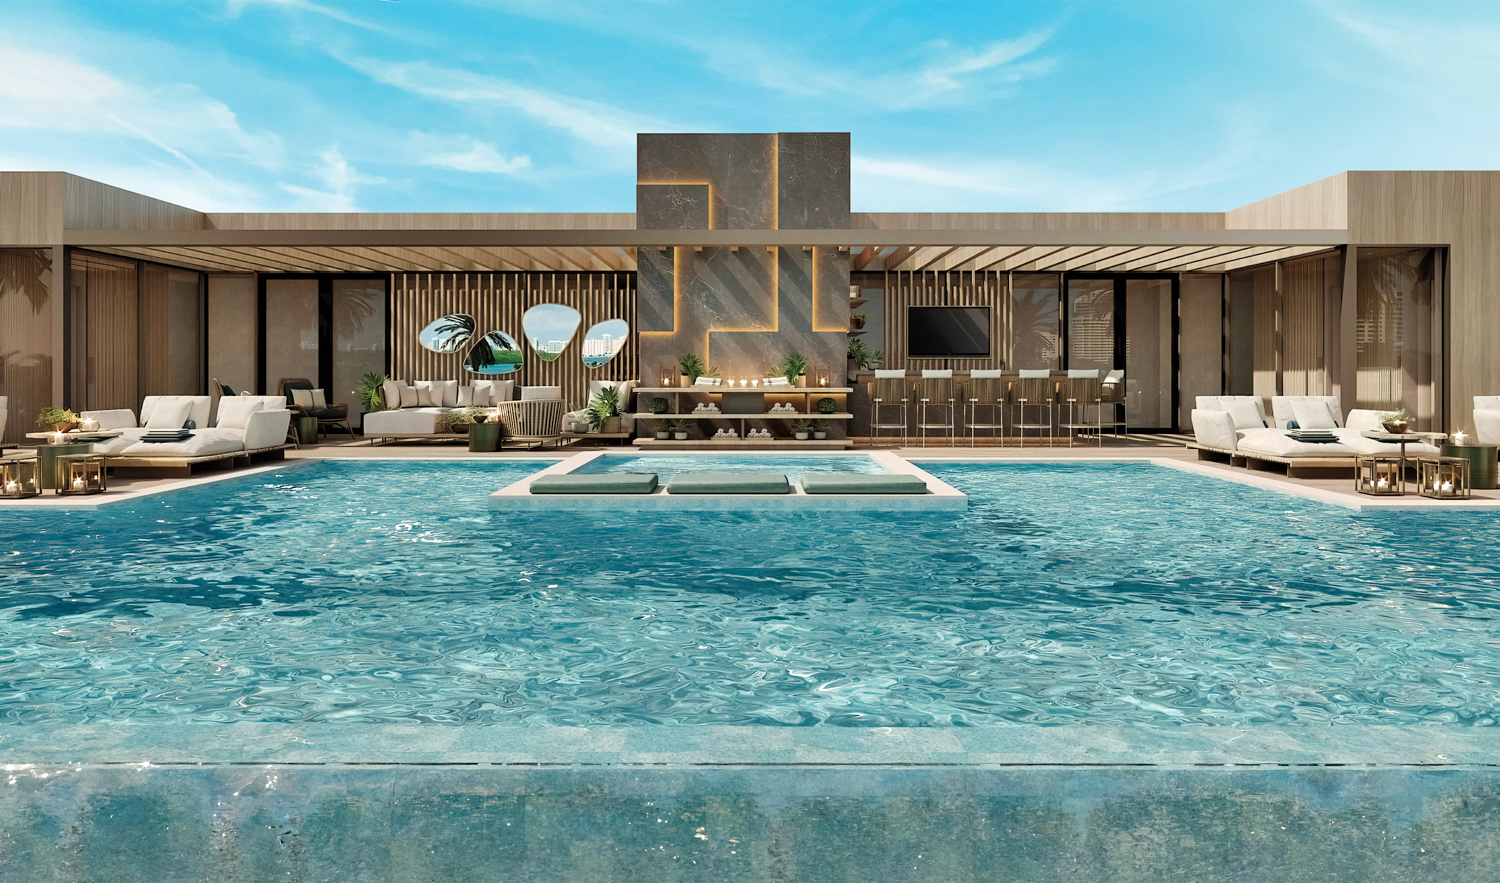 Infinity pool with seating arrangements and a bar lining one poolside